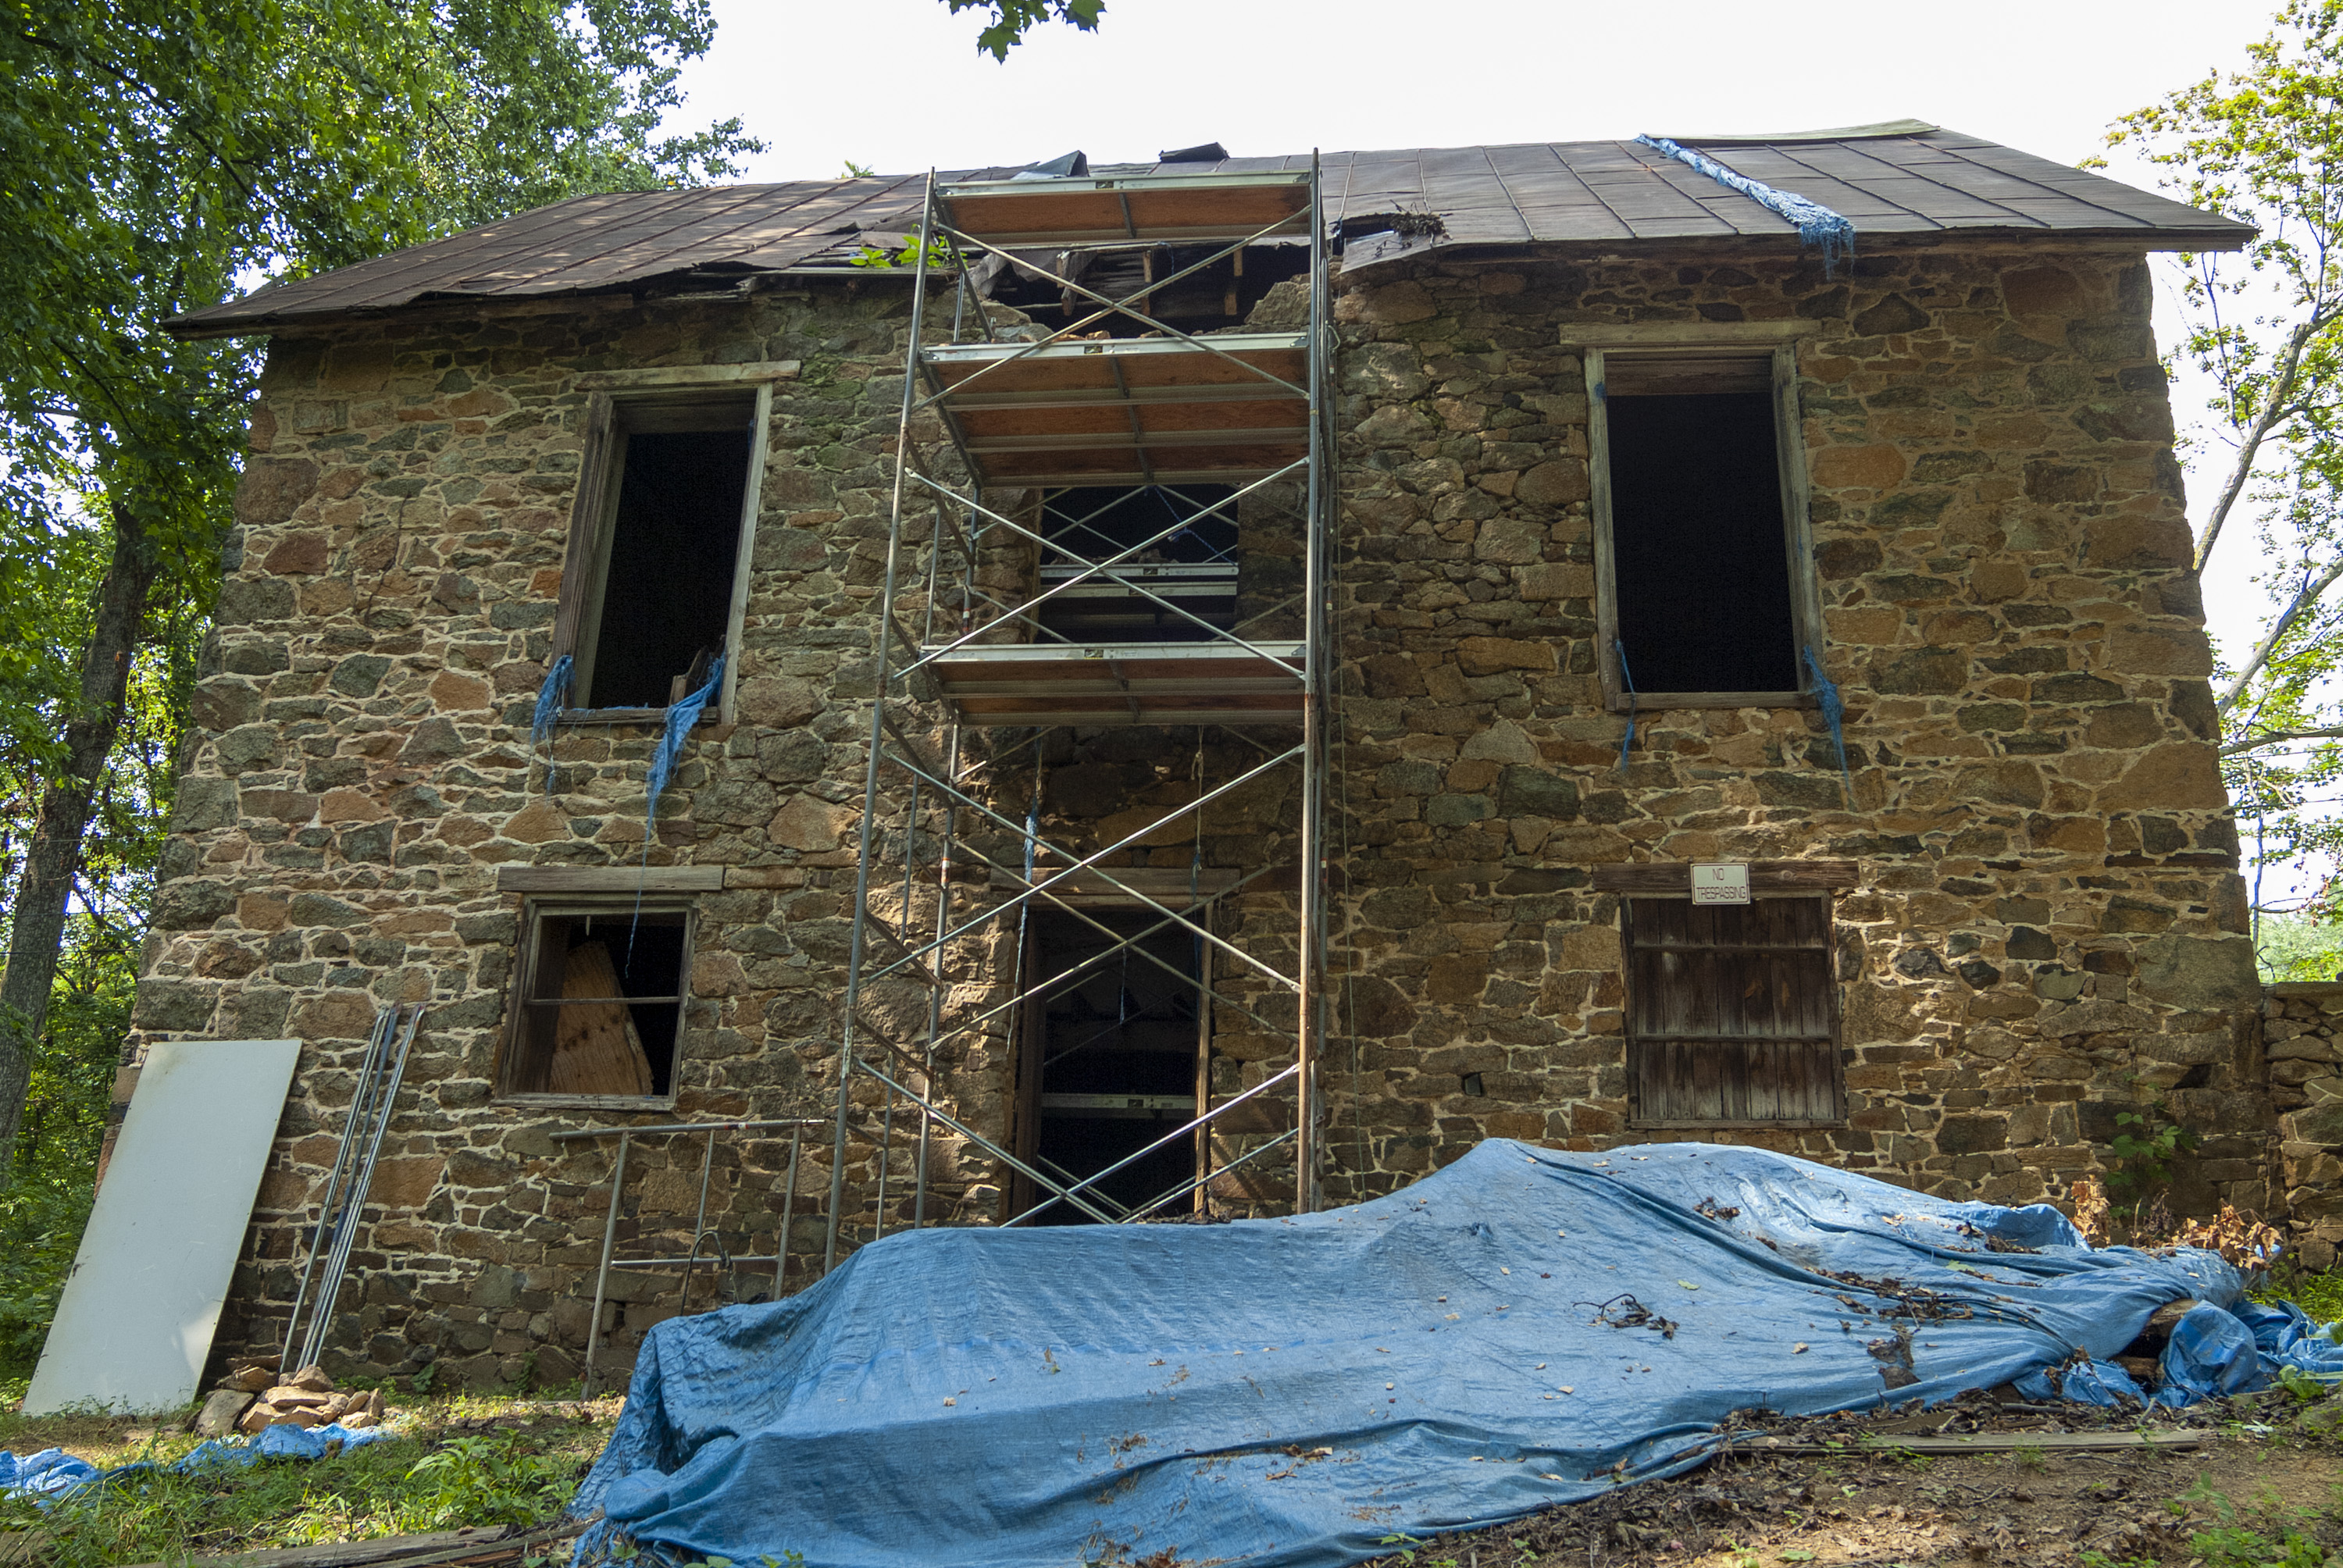 A two-story stone house with scaffolding and tarps on its exterior